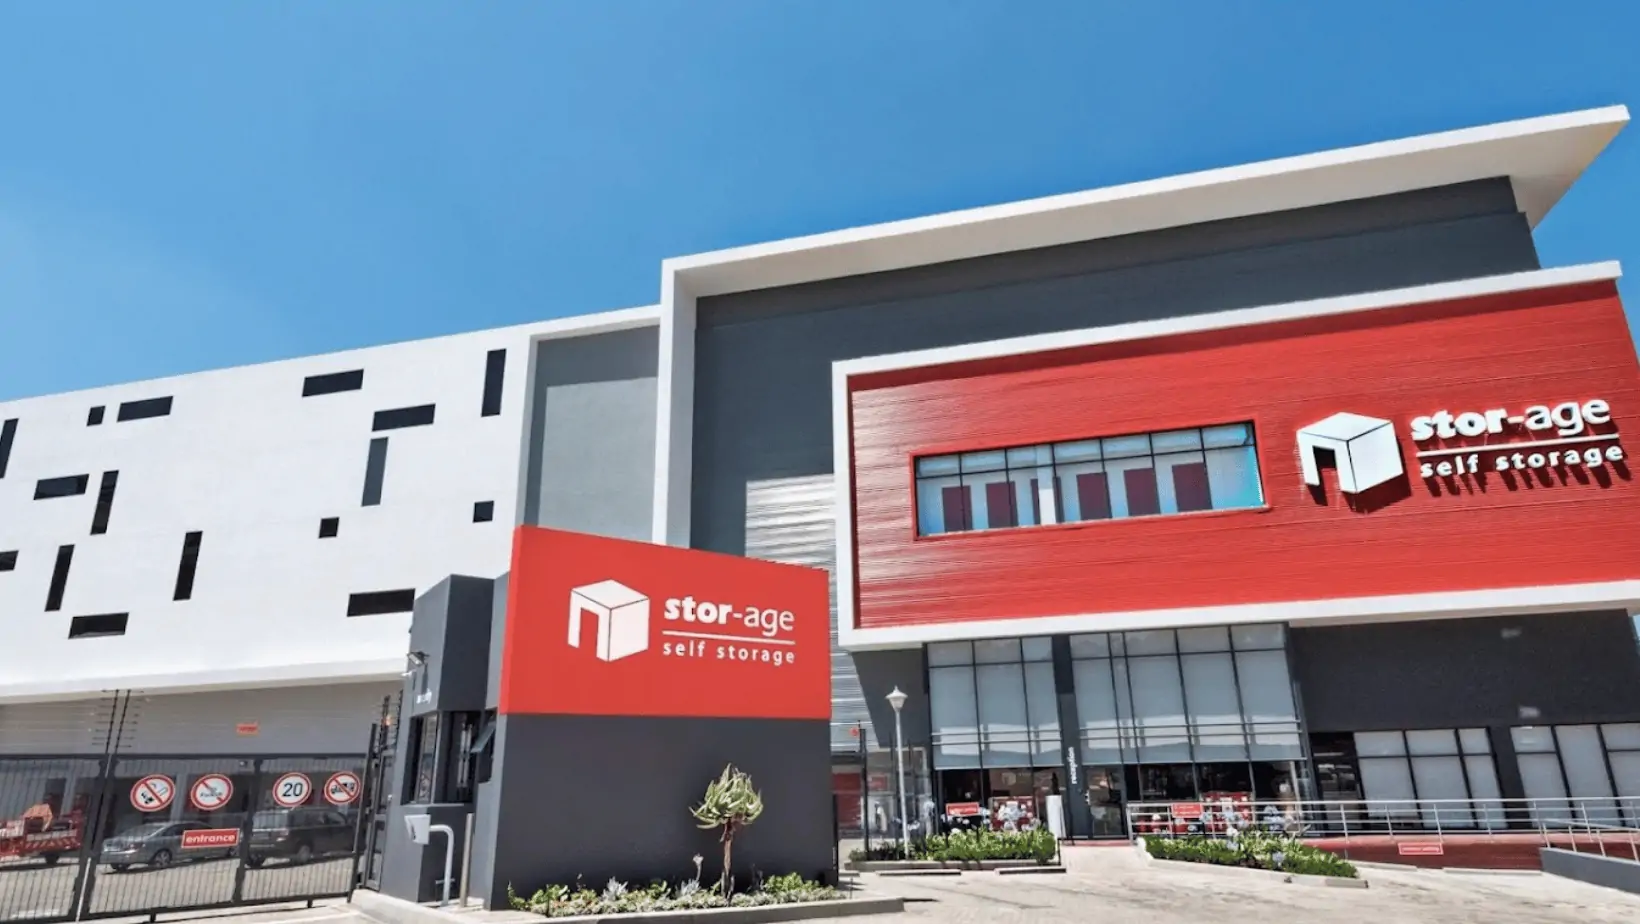 Stor-Age Property REIT Limited Reports Strong Trading Performance and Development Activity